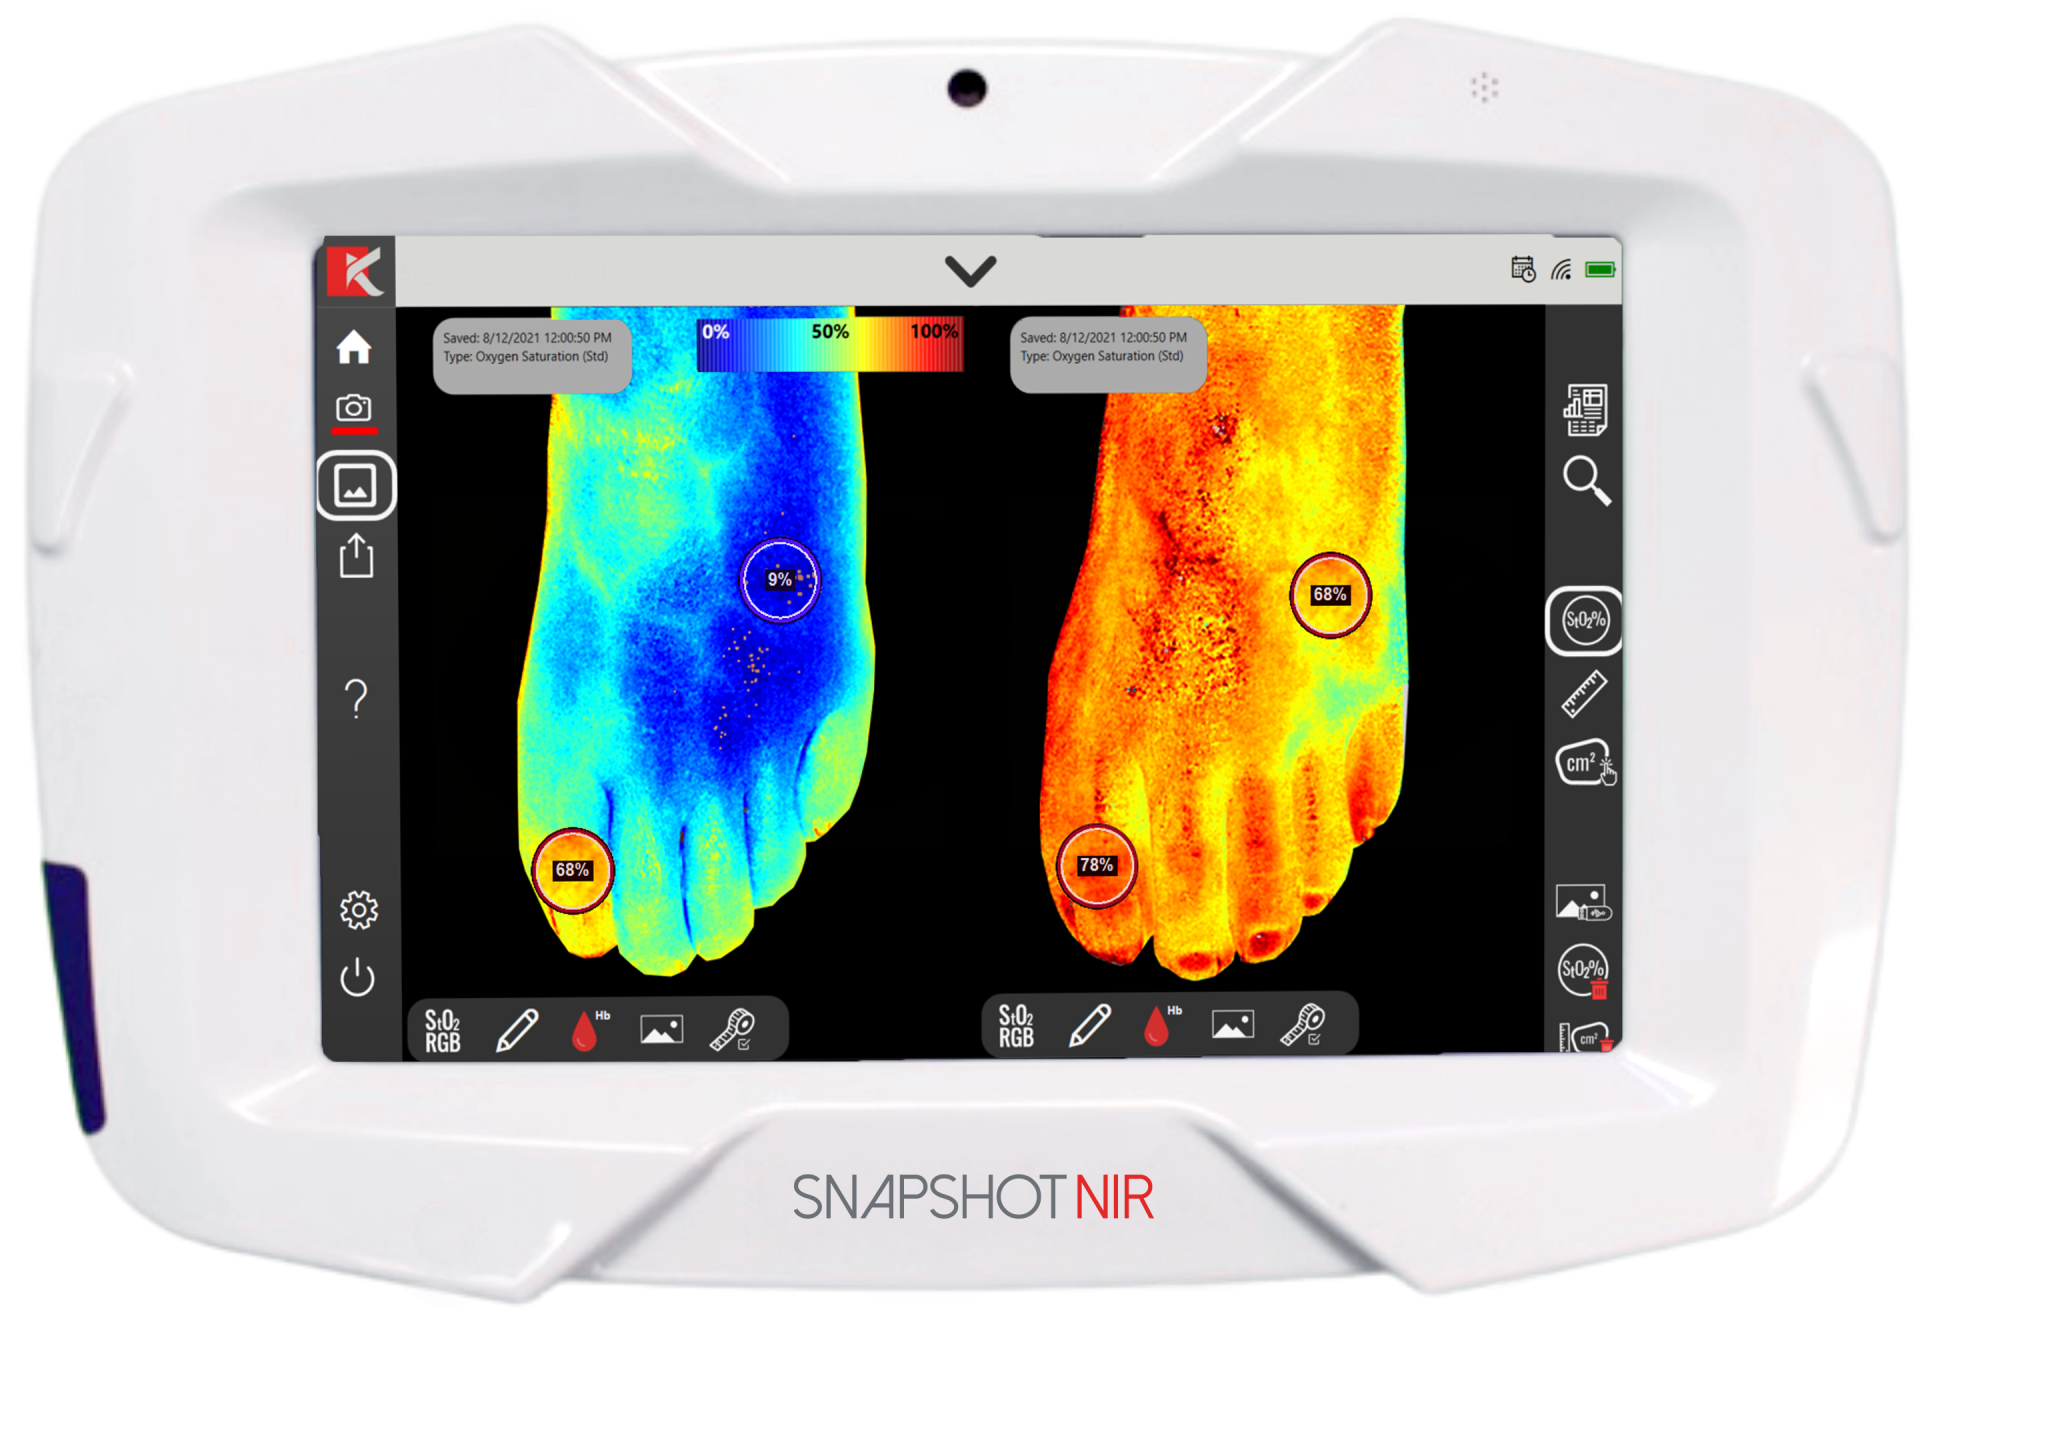 Portable diagnostic device "Snapshot NIR" to replace ultrasound and X-ray